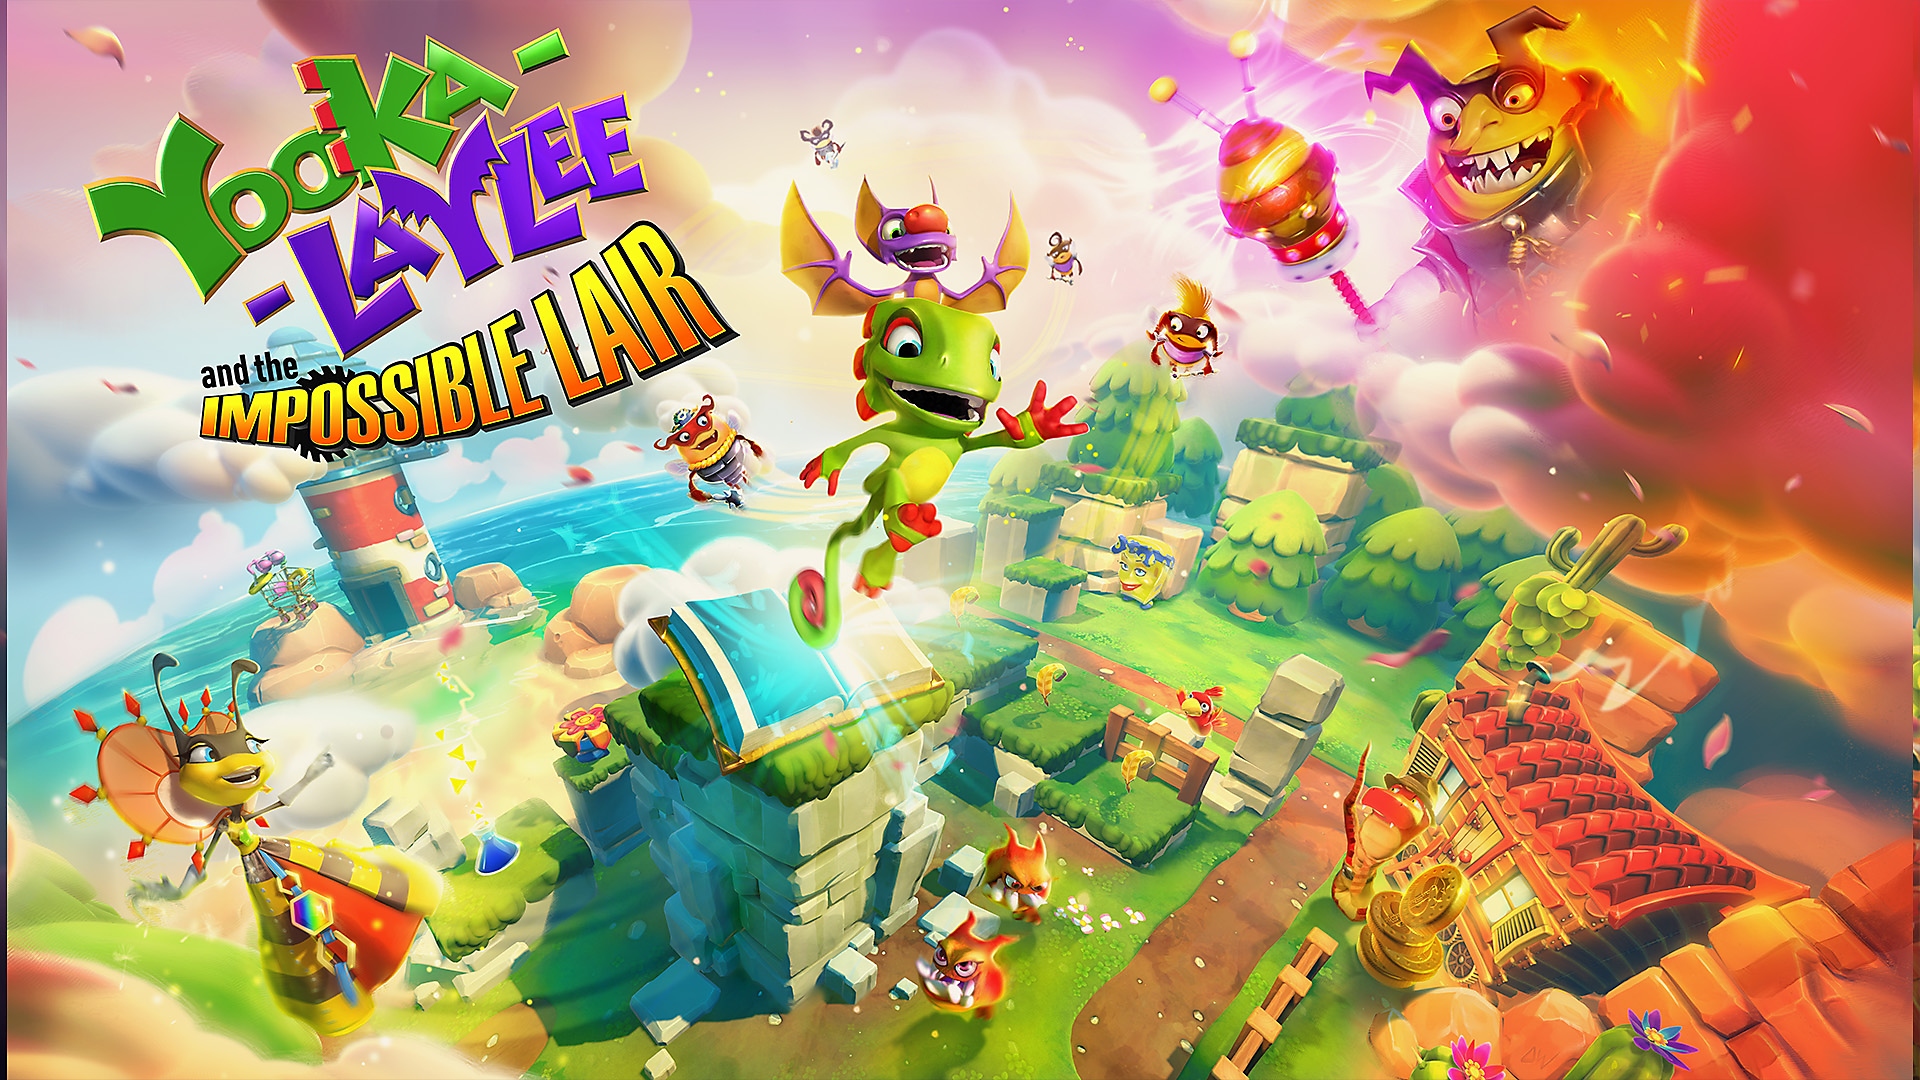 Trailer til Yooka-Laylee and the Impossible Lair